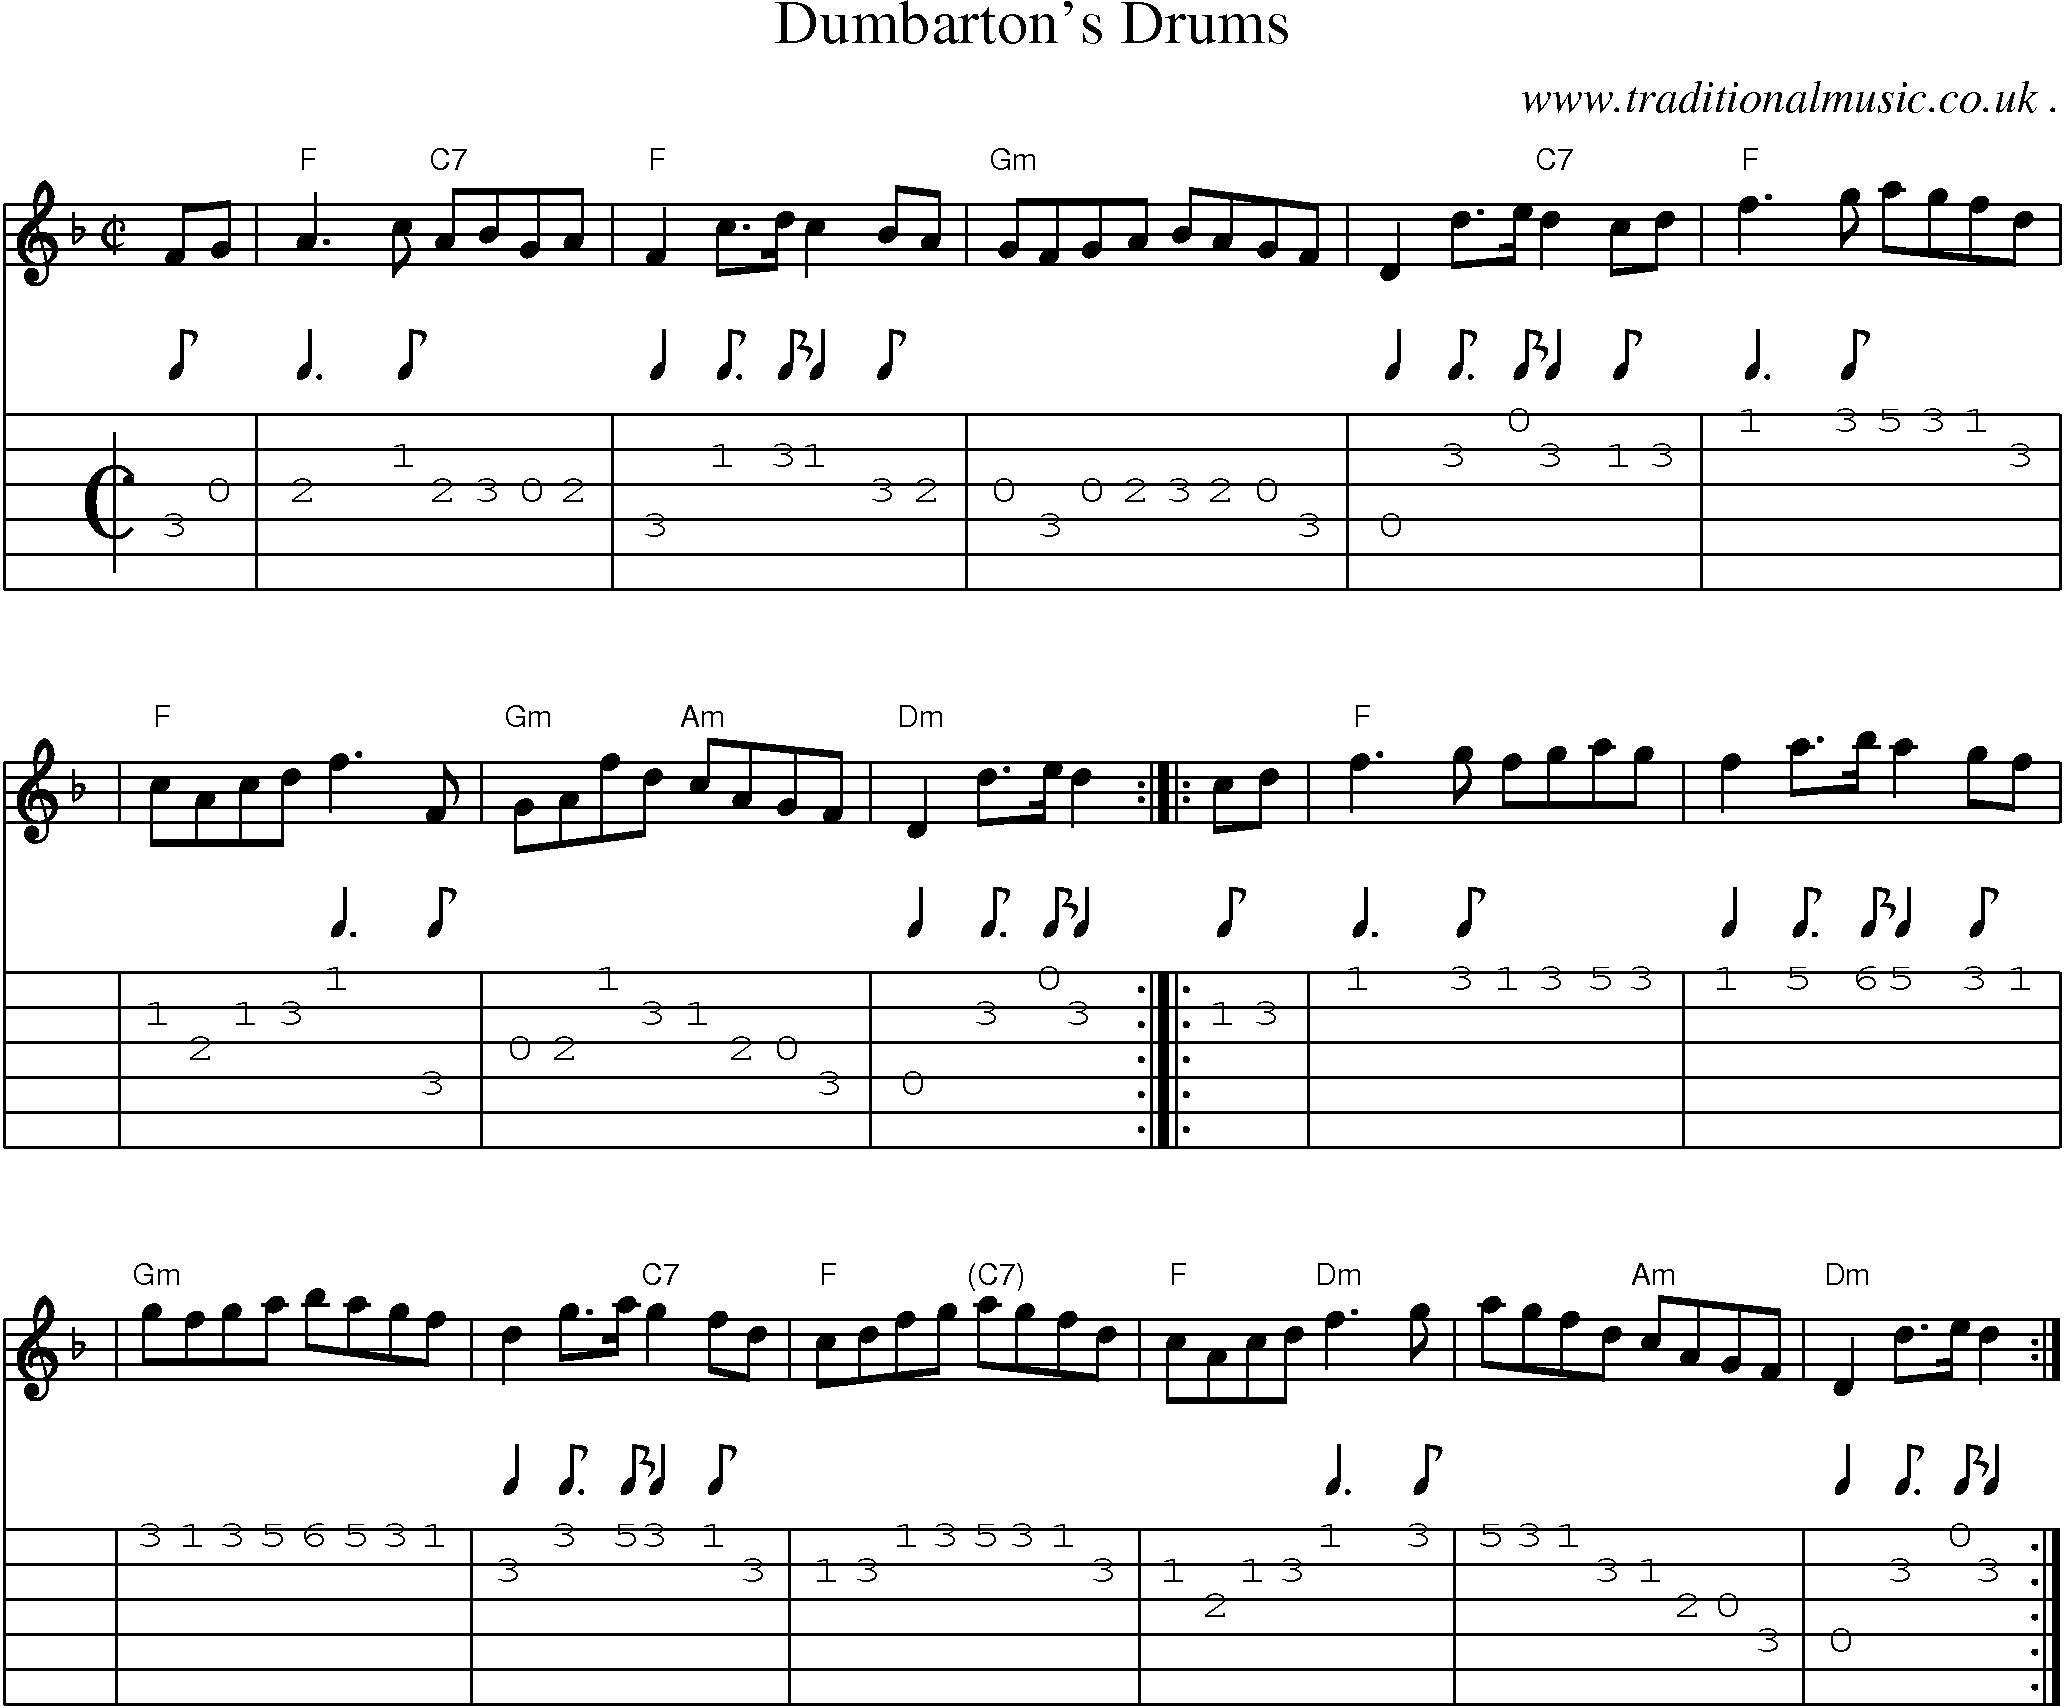 Sheet-music  score, Chords and Guitar Tabs for Dumbartons Drums